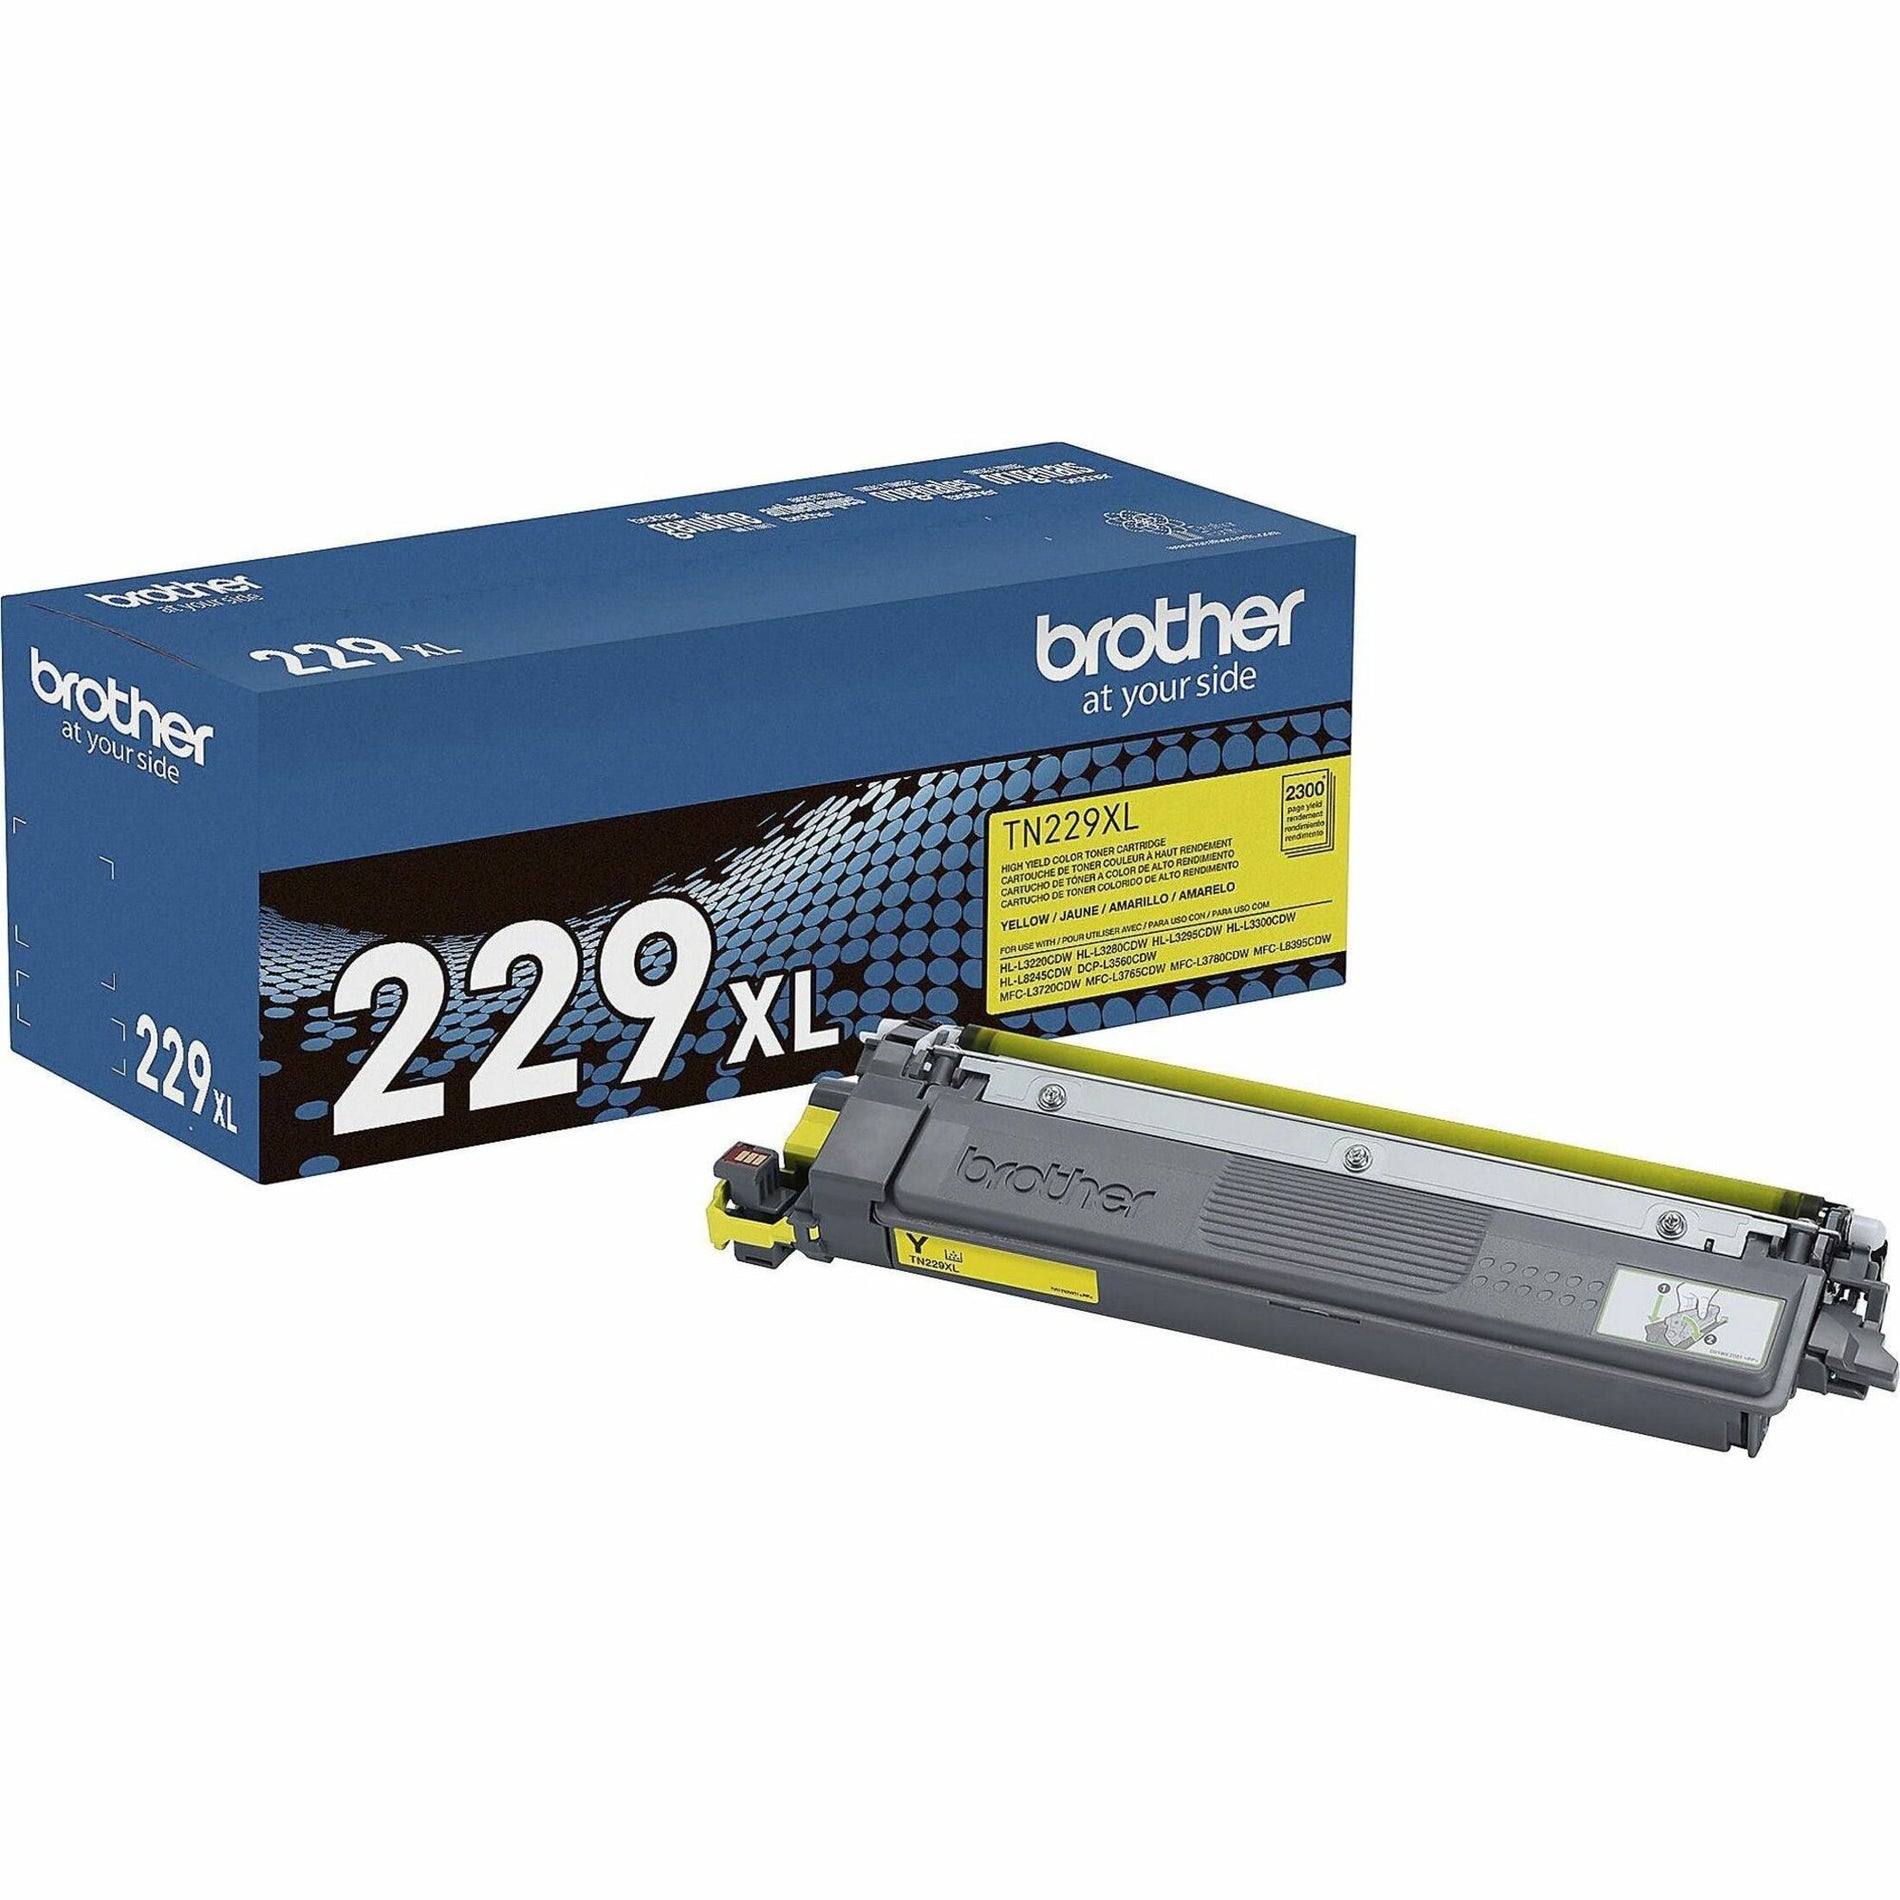 Brother TN229XLY High-yield Yellow Toner Cartridge - Genuine Brother Cartridge for HL-L3220CDW, HL-L3280CDW, and More